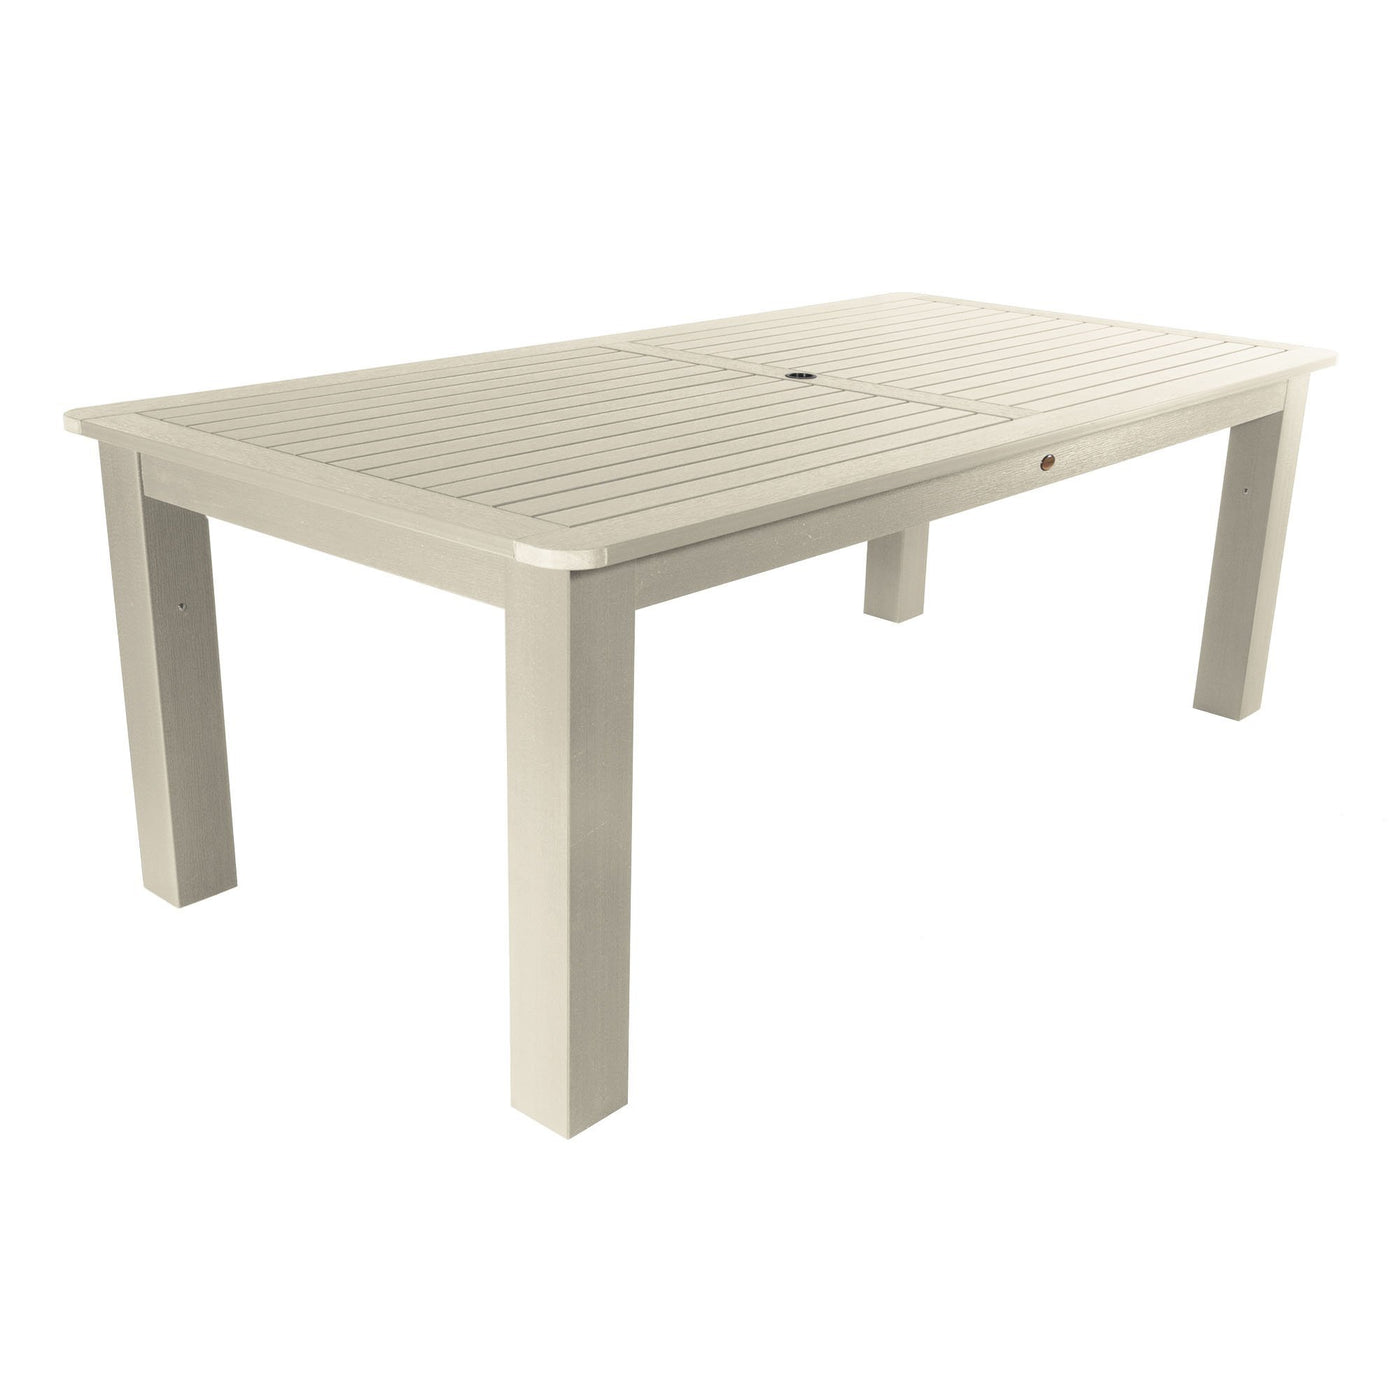 Rectangular 42in x 84in Oversized Dining Table - Dining Height Dining Highwood USA Whitewash 